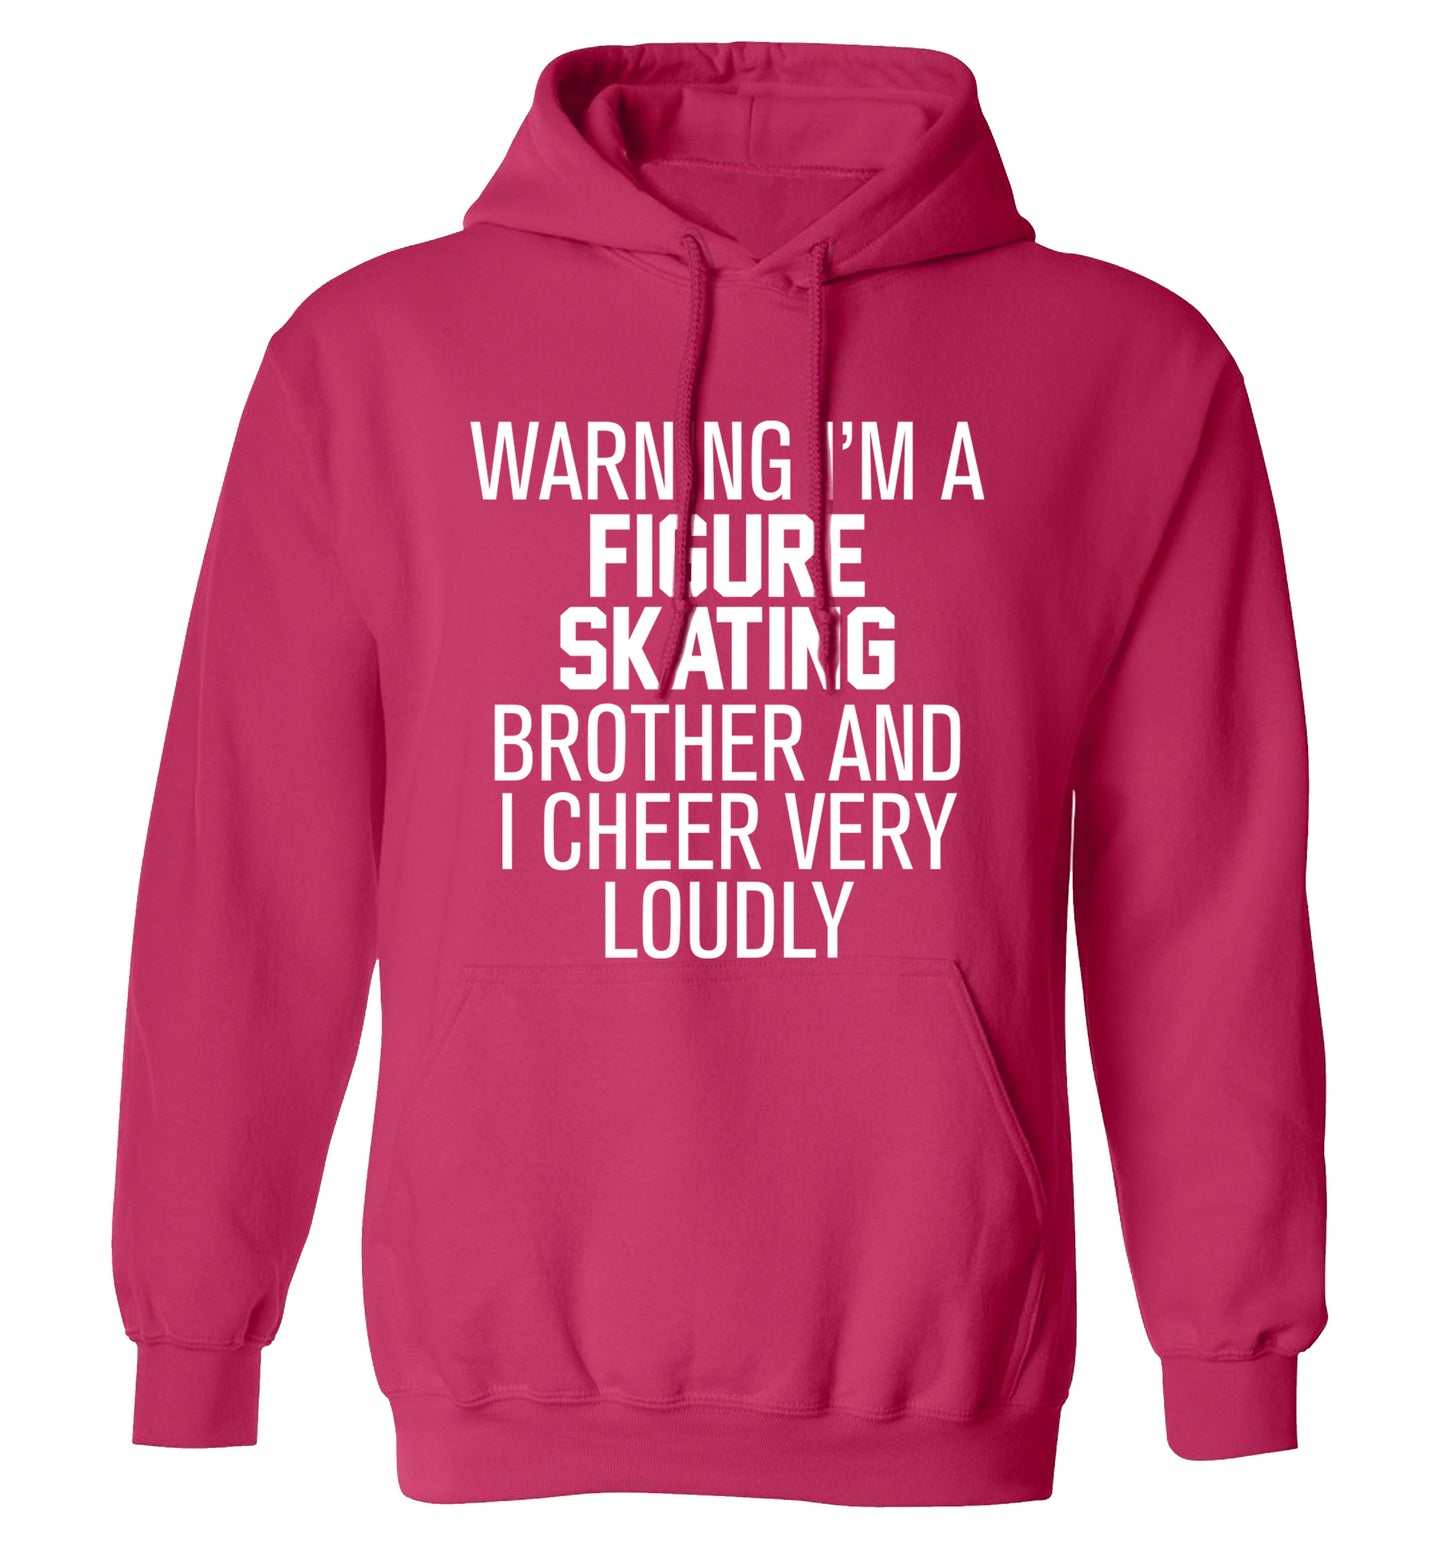 Warning I'm a figure skating brother and I cheer very loudly adults unisexpink hoodie 2XL